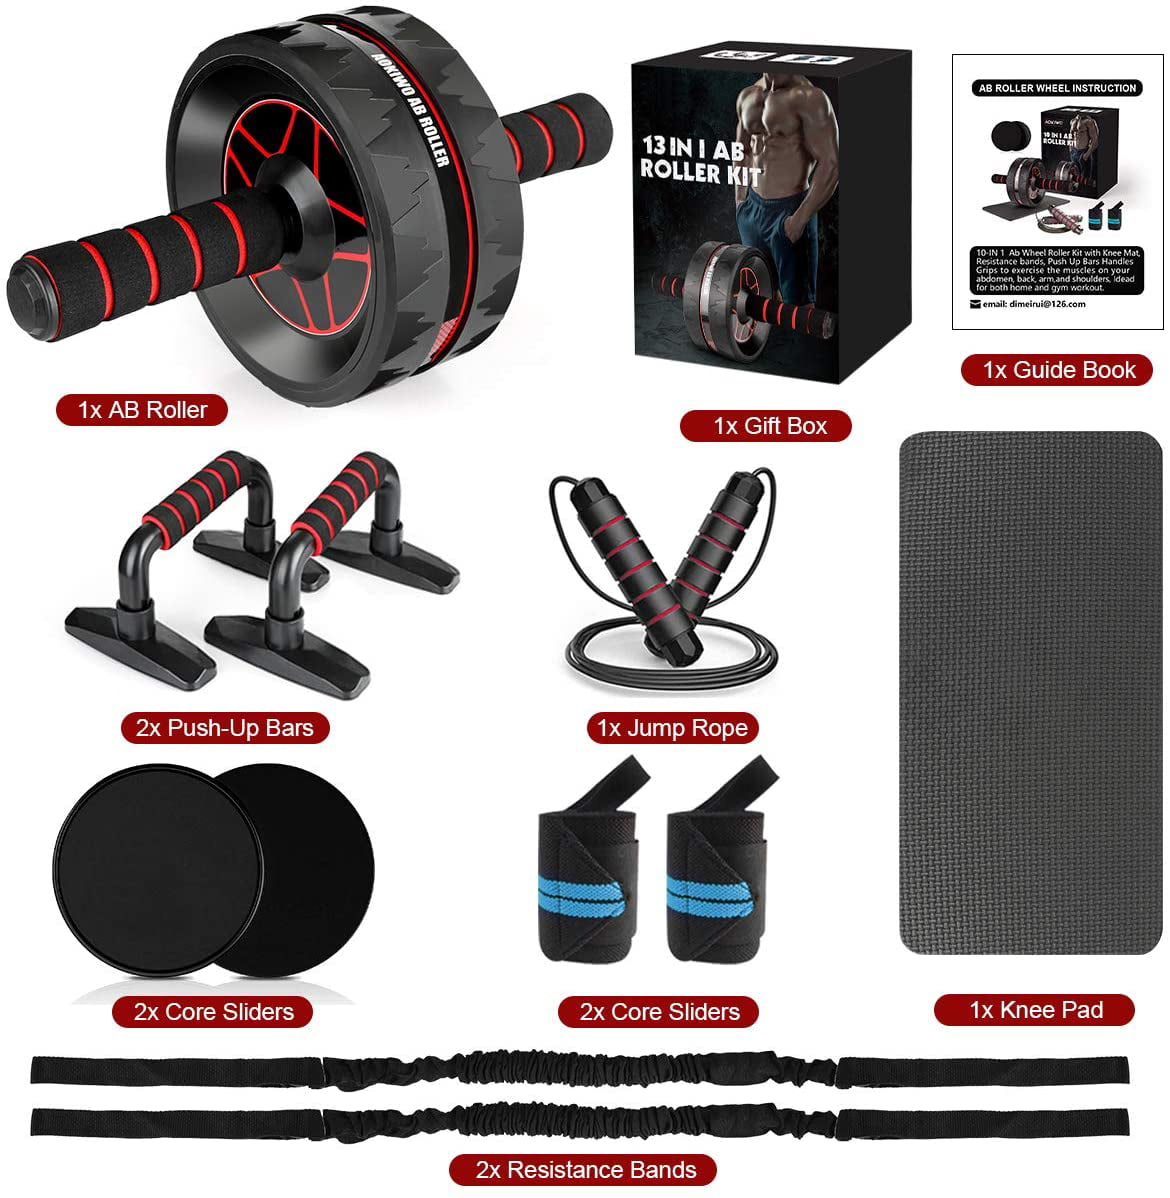 Exercise Equipment for Abs AB Workout Equipment Arms Extra Cable & Accesories Jump Rope Core Knee Pad Legs 3-in-1 AB Wheel Roller Kit + Gliding Discs 3 Years Warranty-Workout Equipment